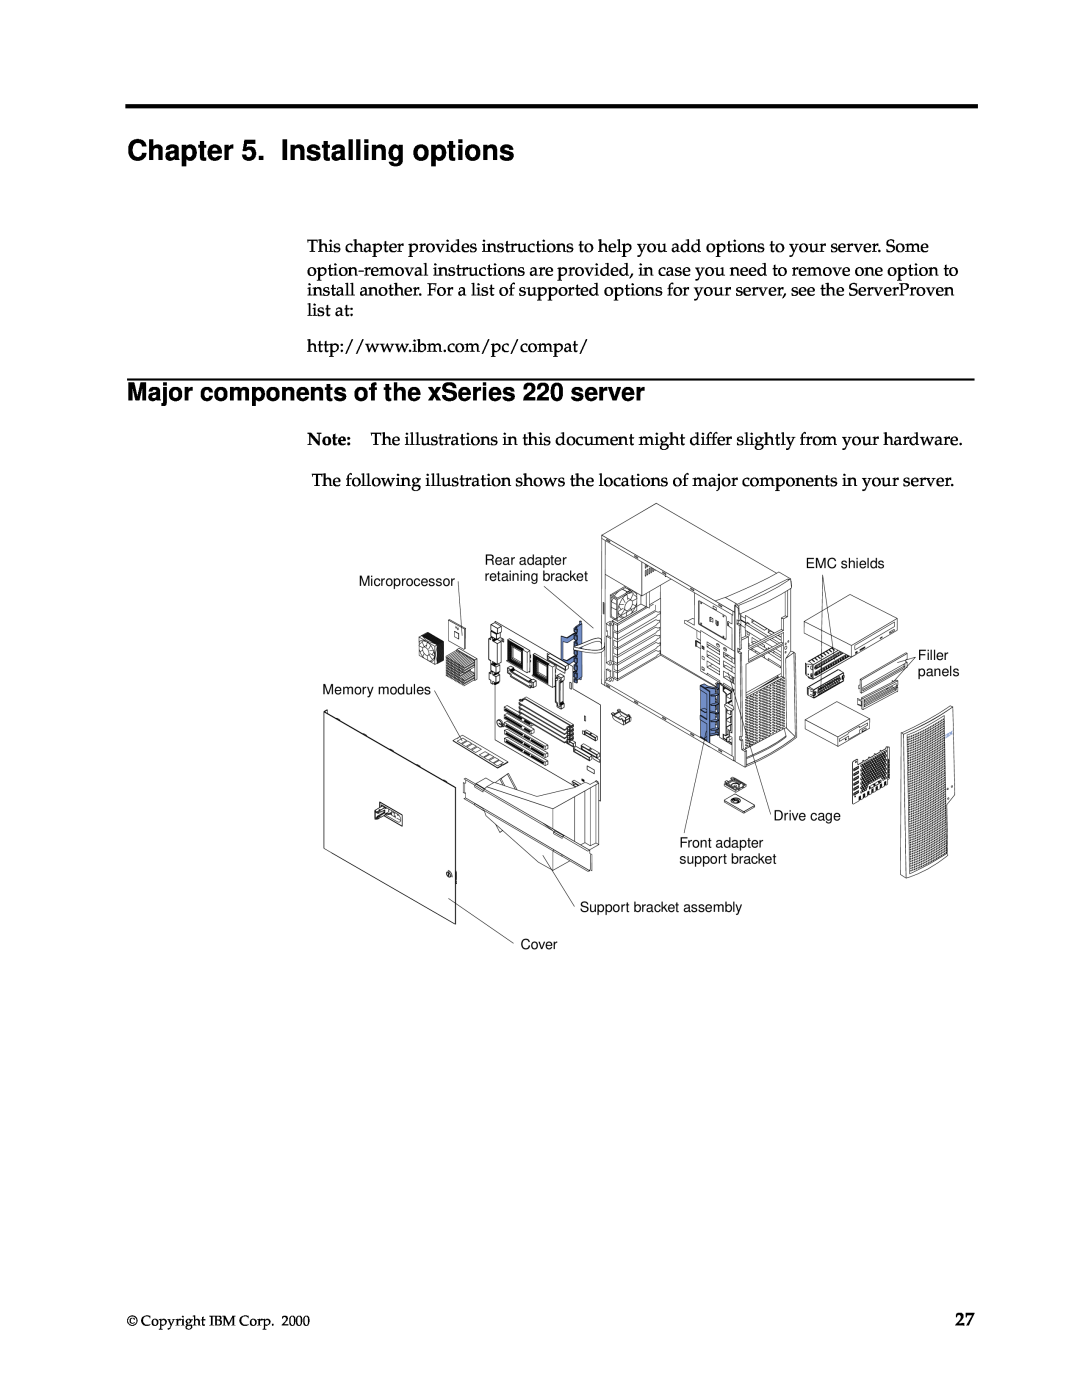 IBM manual Installing options, Major components of the xSeries 220 server 